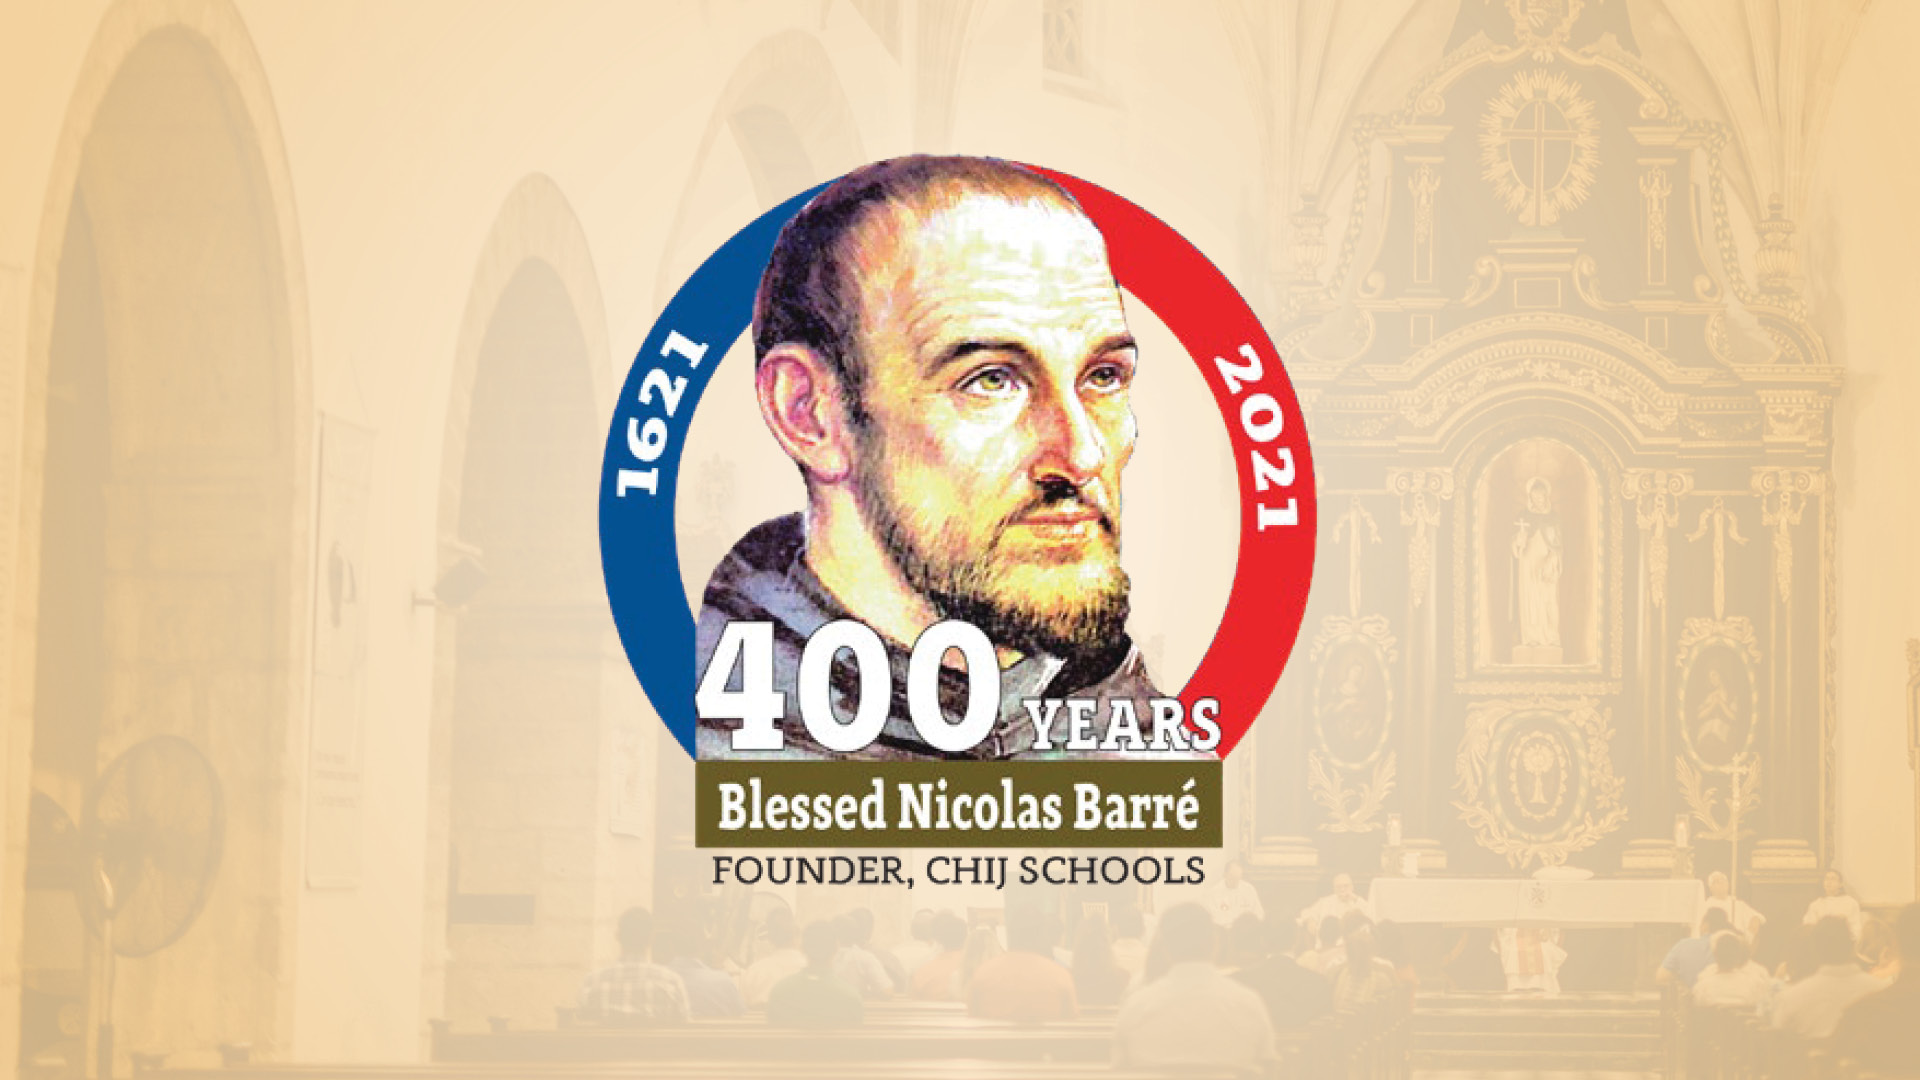 Celebrating the Jubilee of Blessed Nicolas Barré